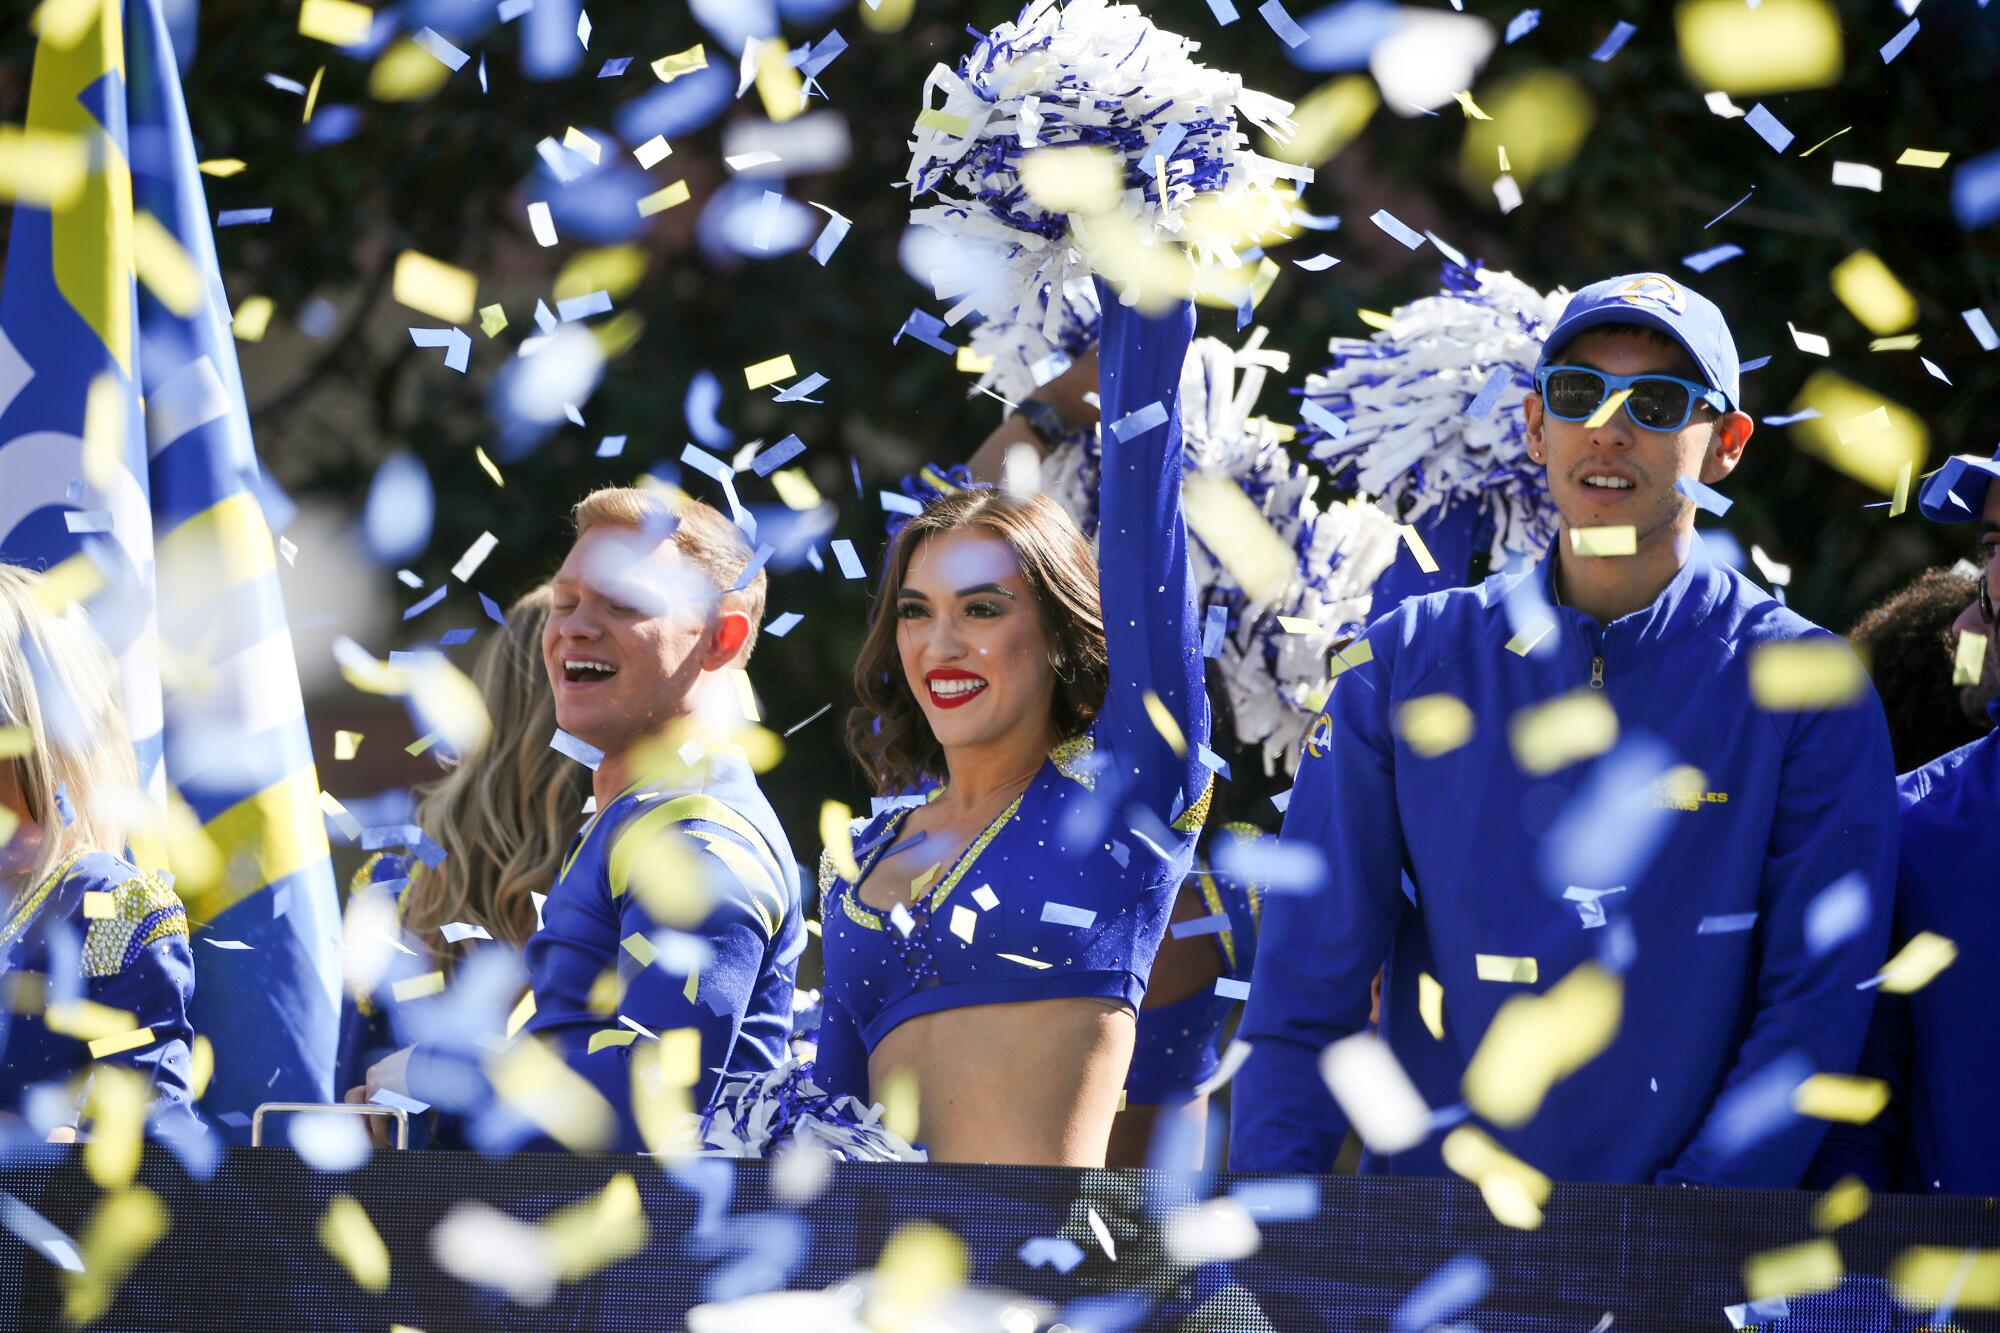 Confetti flutters over a Rams cheerleader riding in the Super Bowl victory parade Wednesday morning.